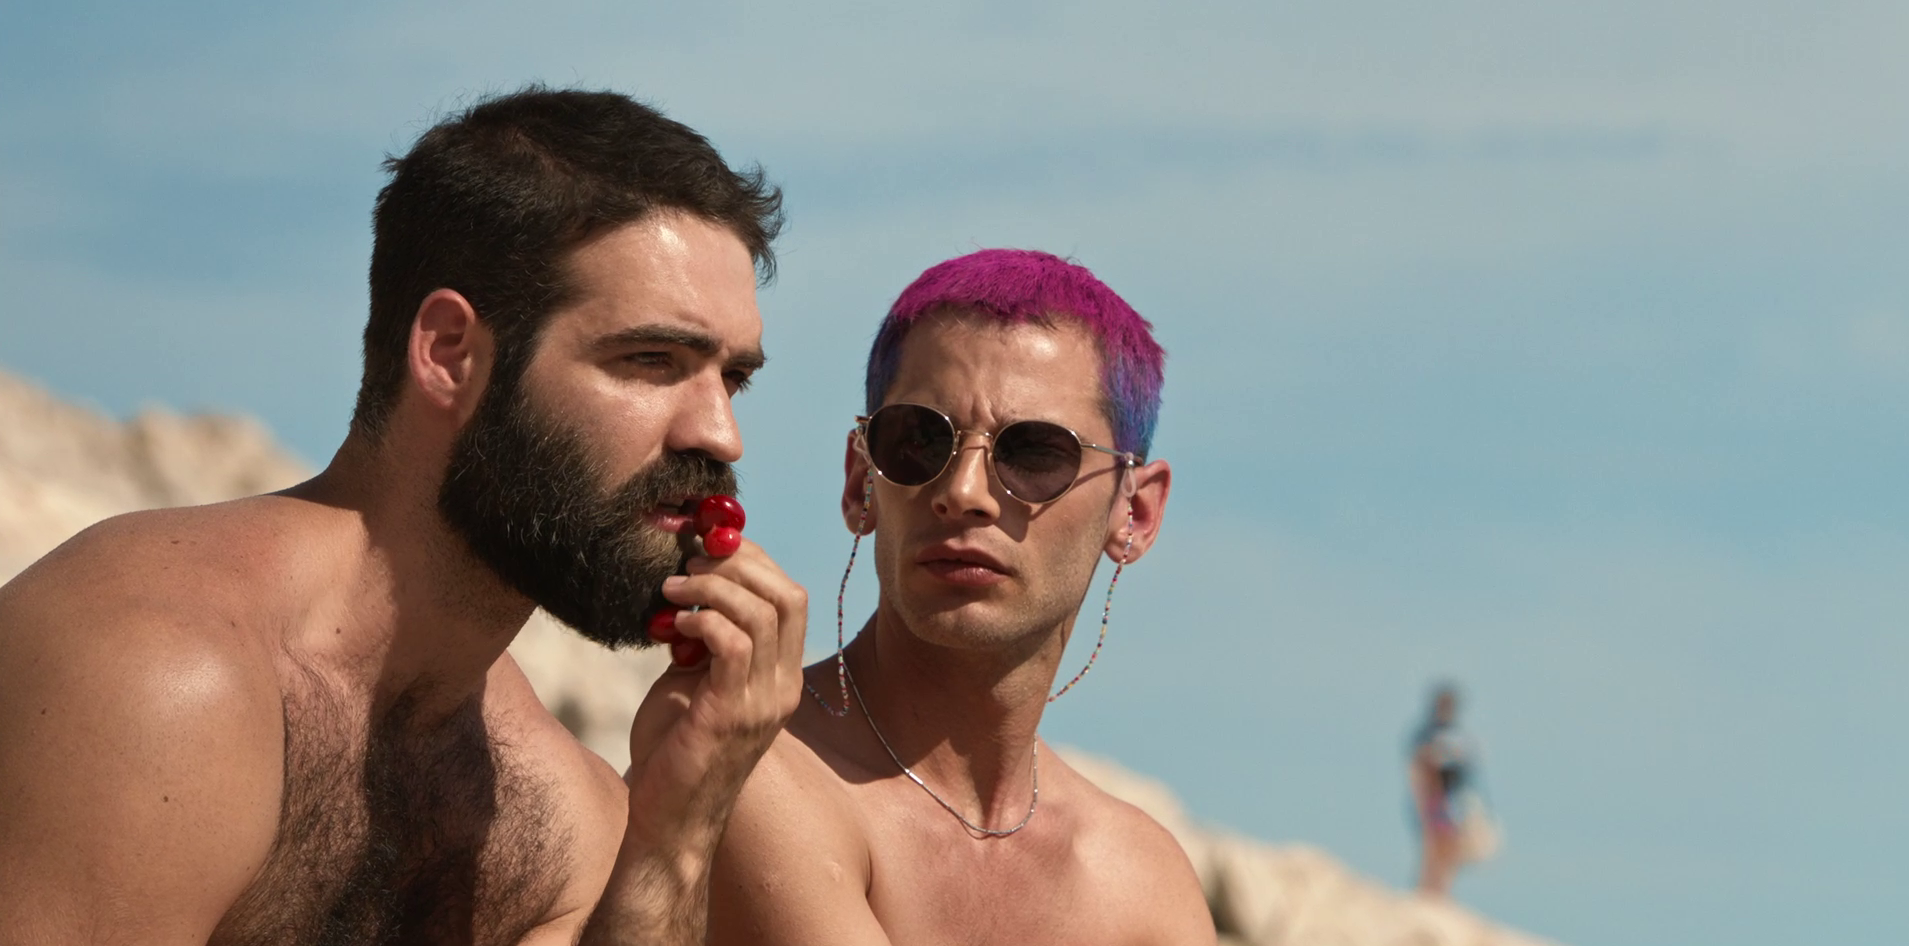 Two shirtless men sit on a beach: the bearded one is eating a cherry while the other, with purple and blue hair, is wearing sunglasses